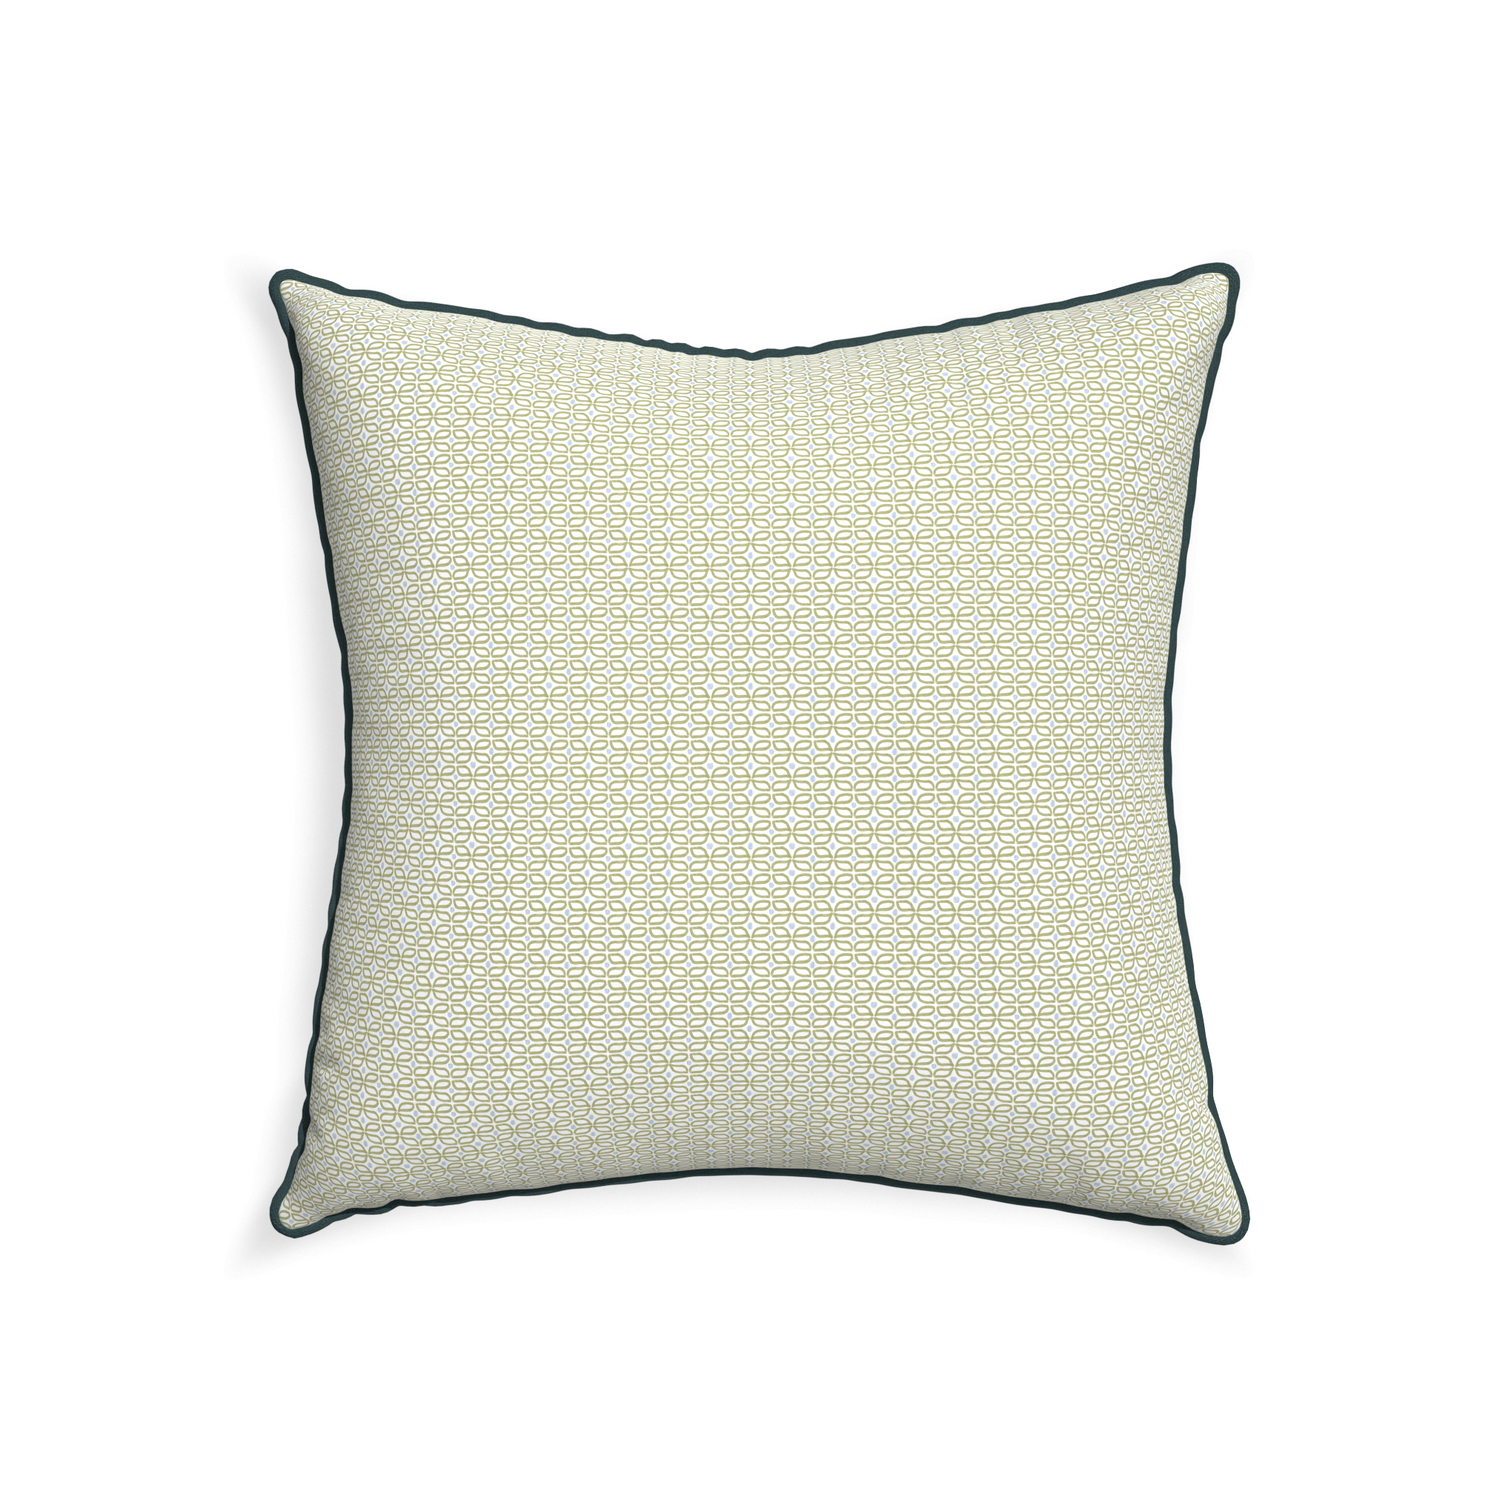 22-square loomi moss custom moss green geometricpillow with p piping on white background